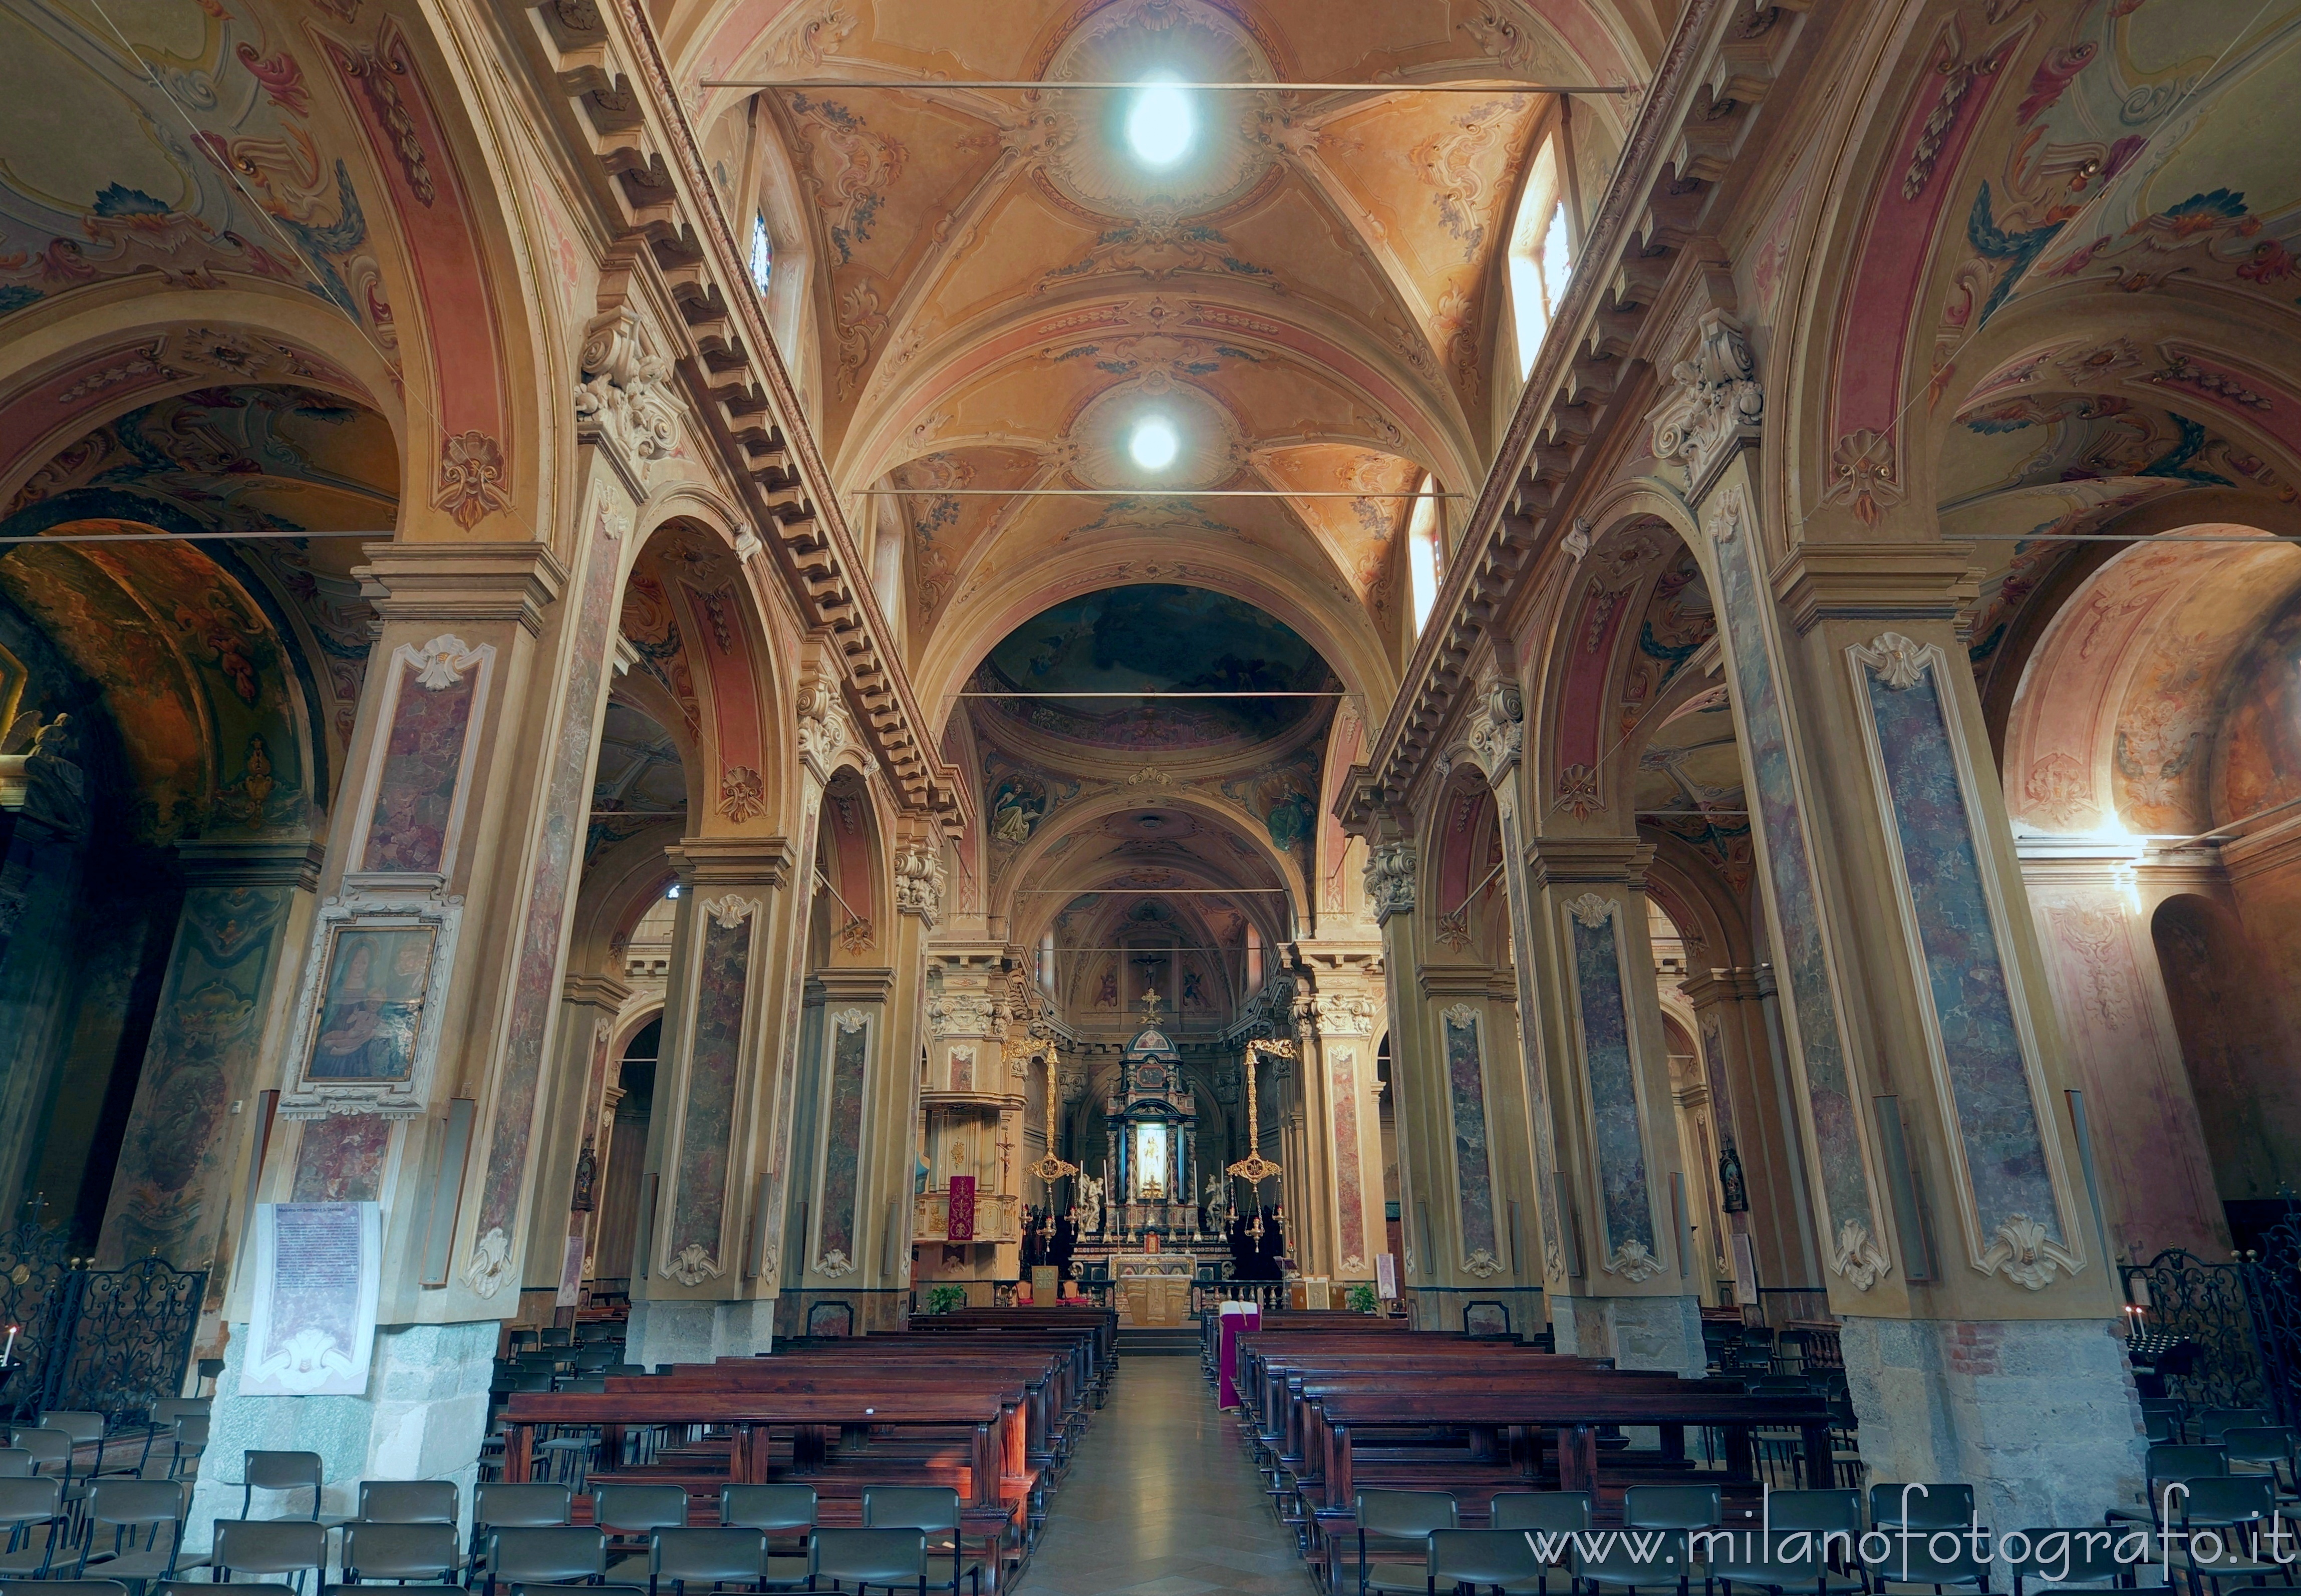 Vimercate (Monza e Brianza, Italy): Interior of the Sanctuary of the Blessed Virgin of the Rosary - Vimercate (Monza e Brianza, Italy)